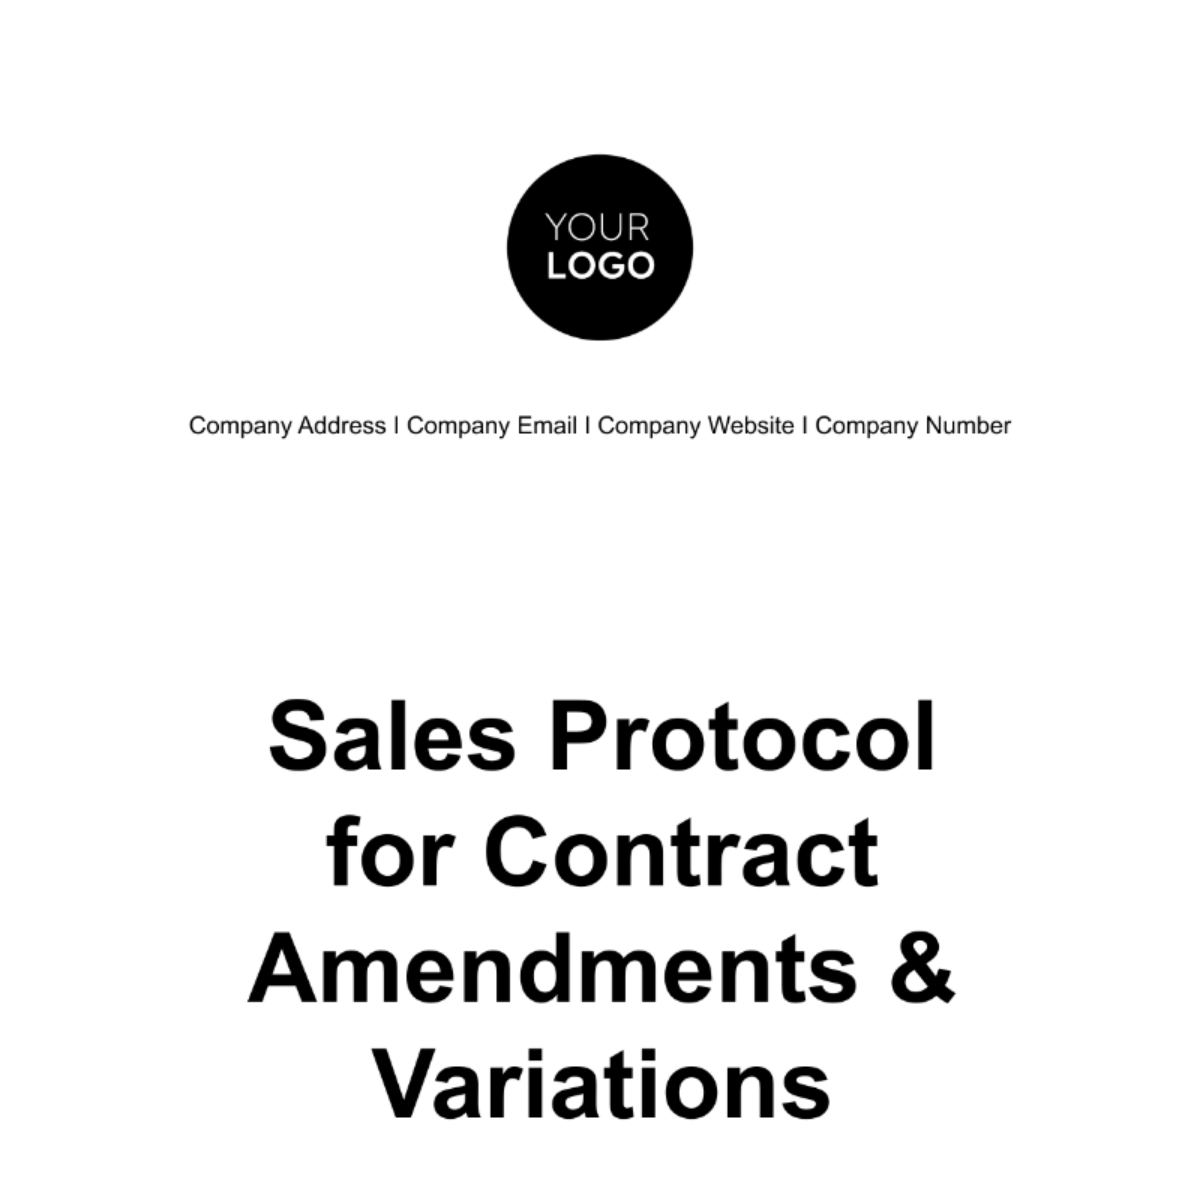 Free Sales Protocol for Contract Amendments & Variations Template